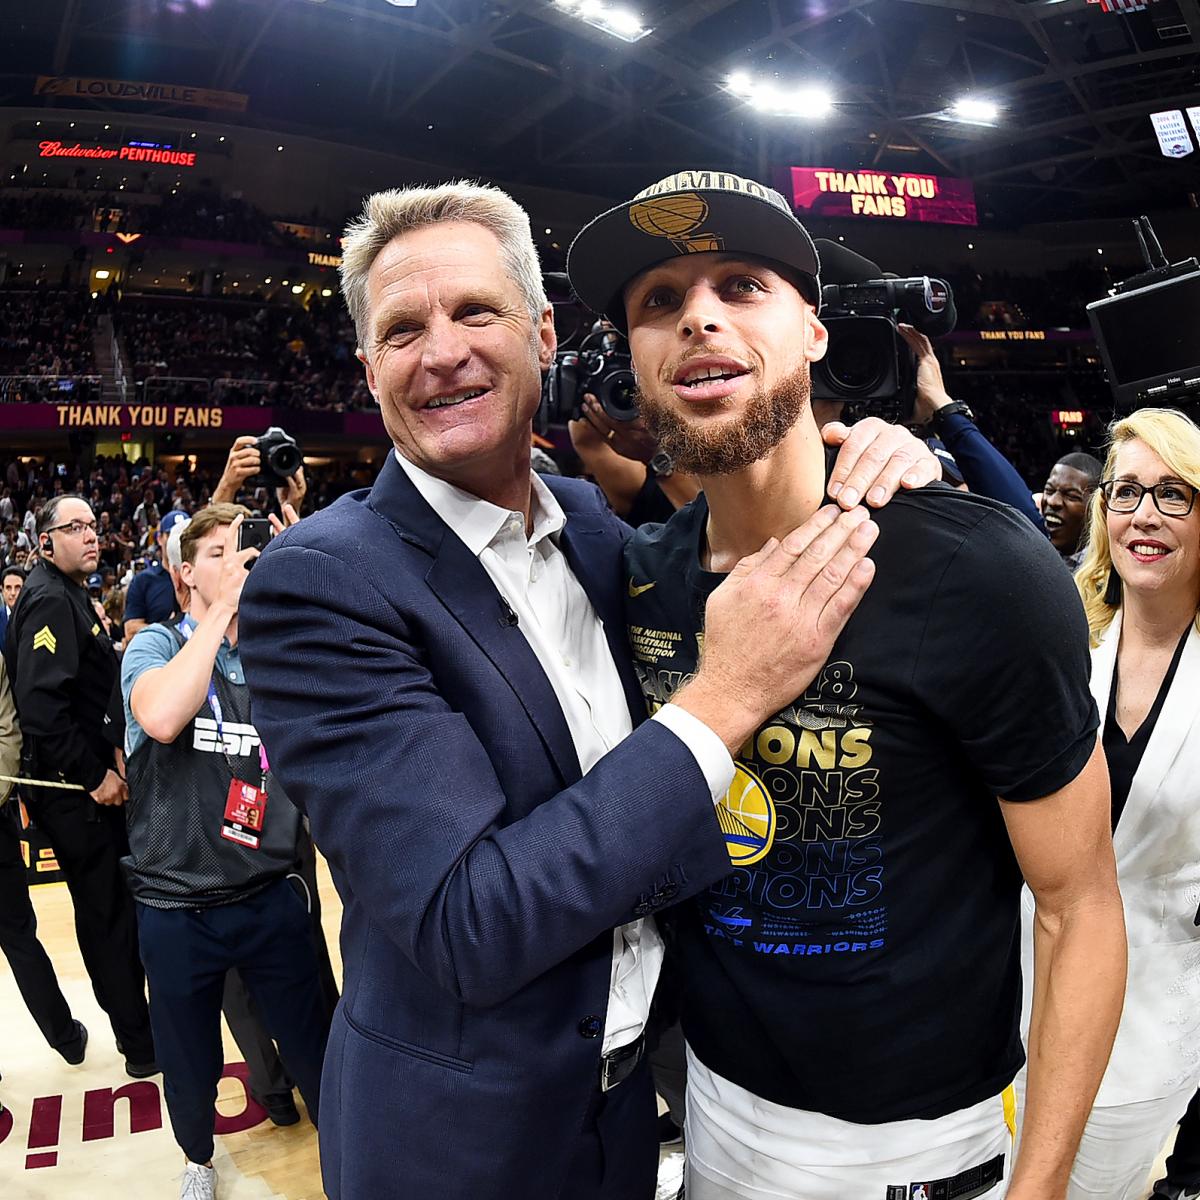 Warriors Parade 2018: Route, Date, Timetable, TV Info and more